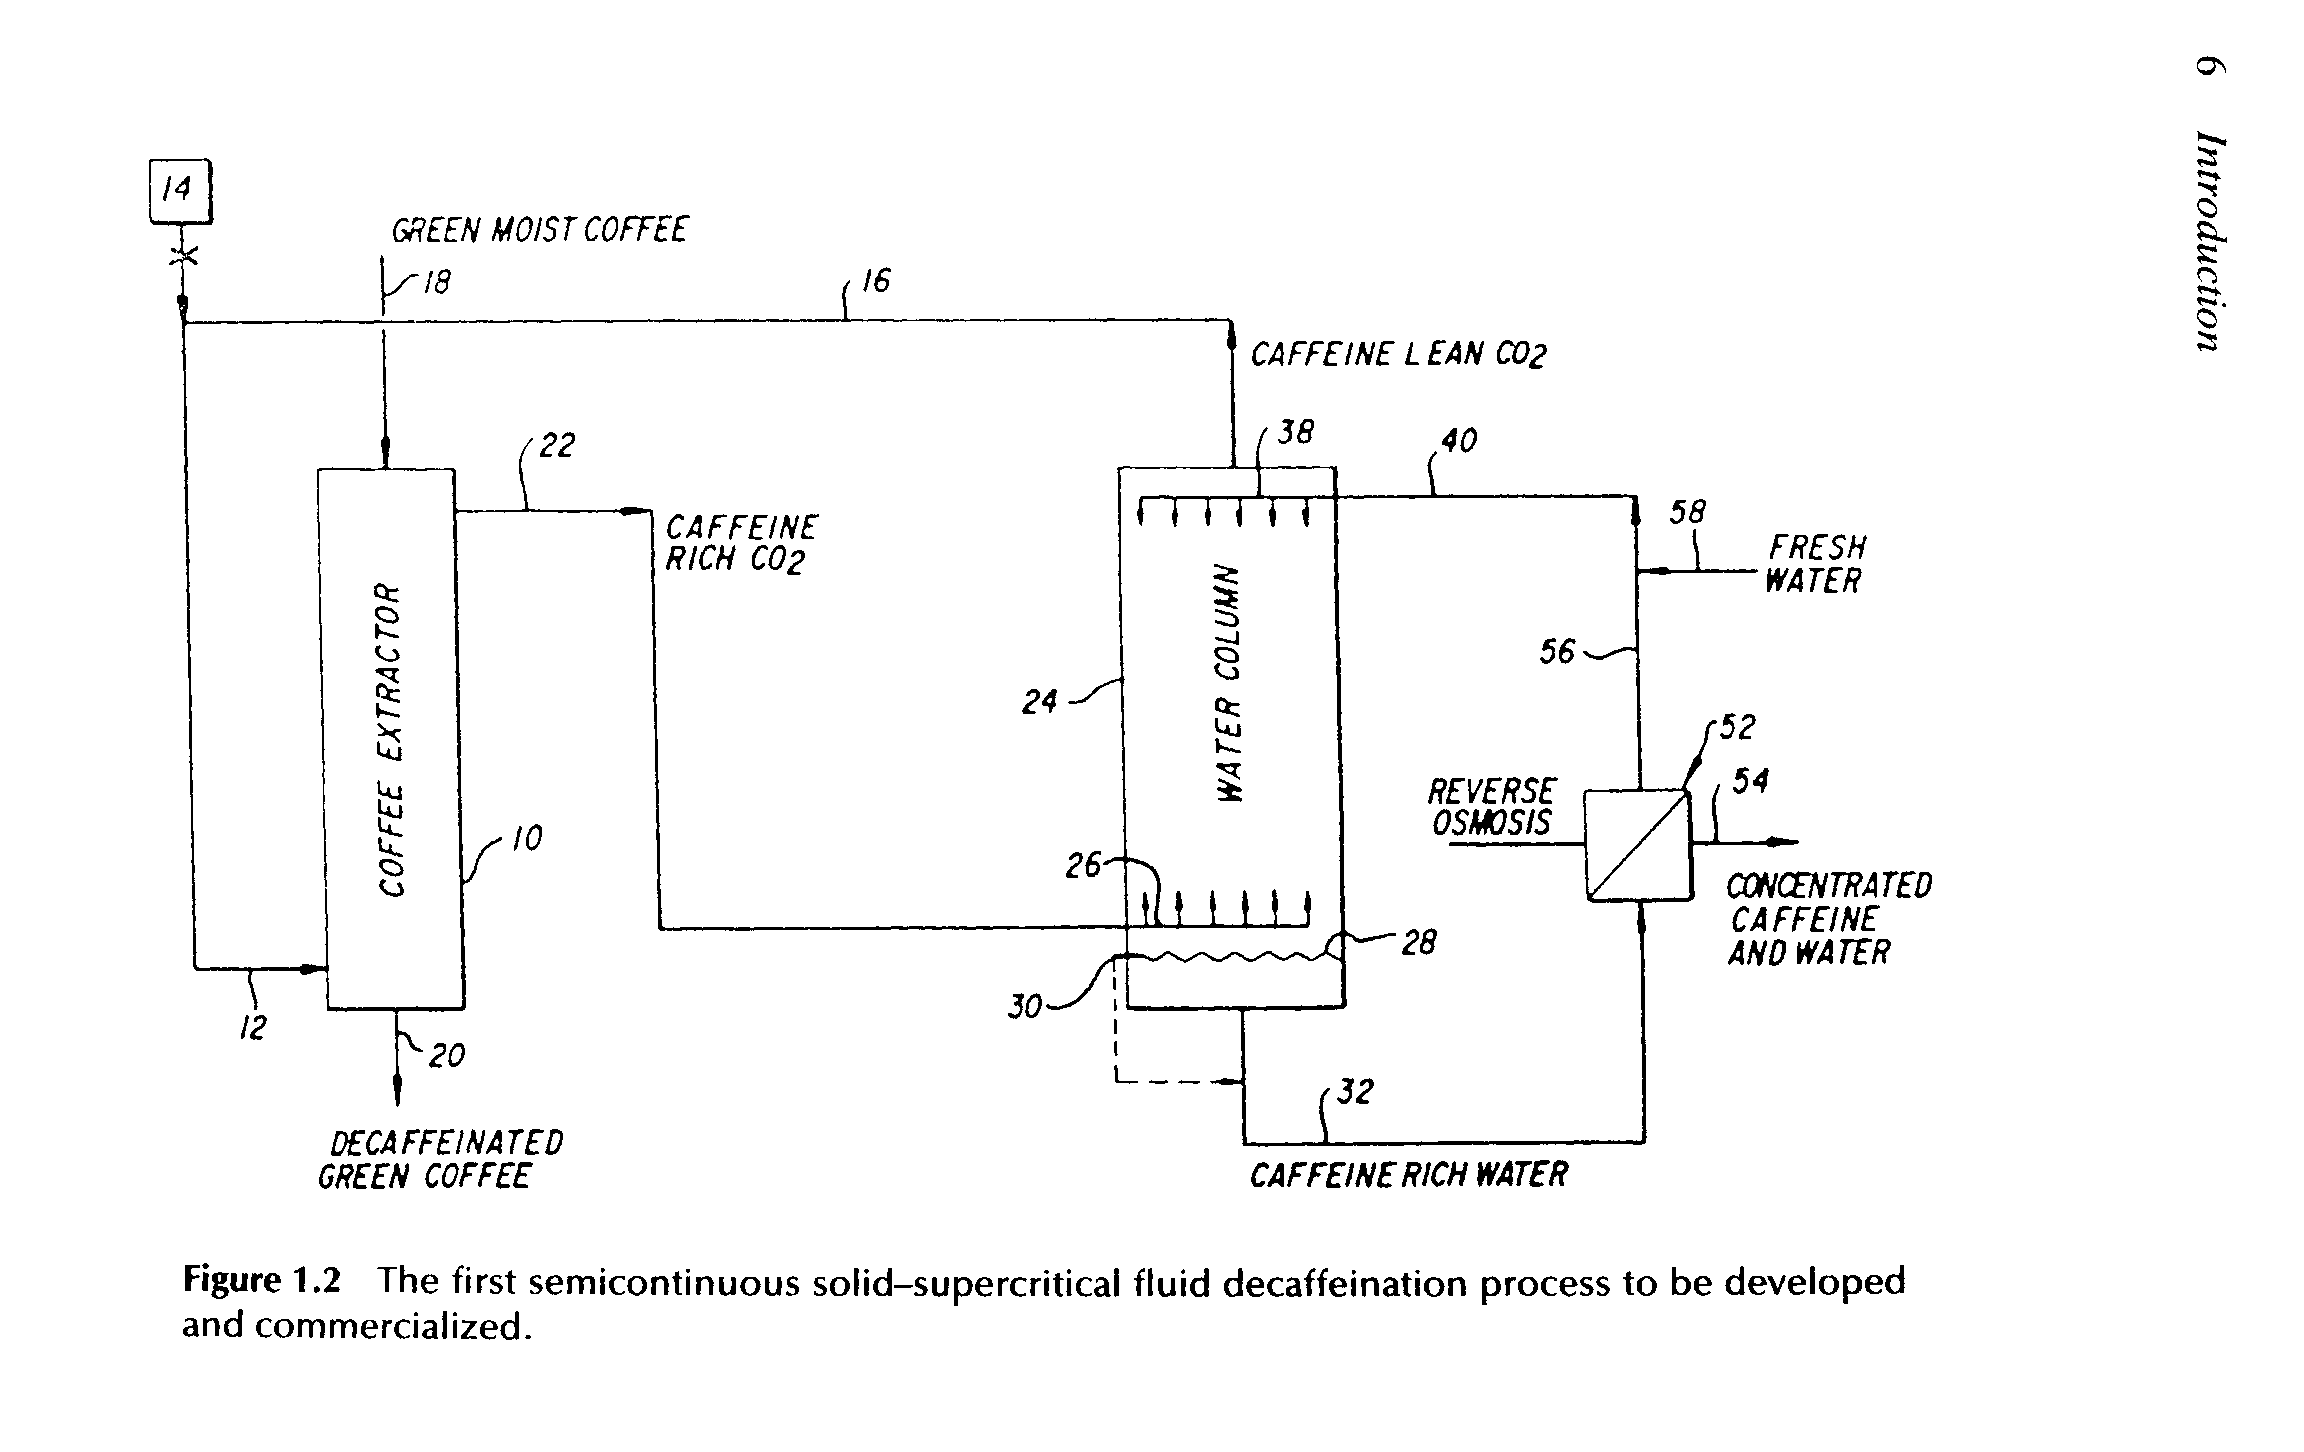 Figure 1.2 The first semicontinuous solid-supercritical fluid decaffeination process to be developed and commercialized.